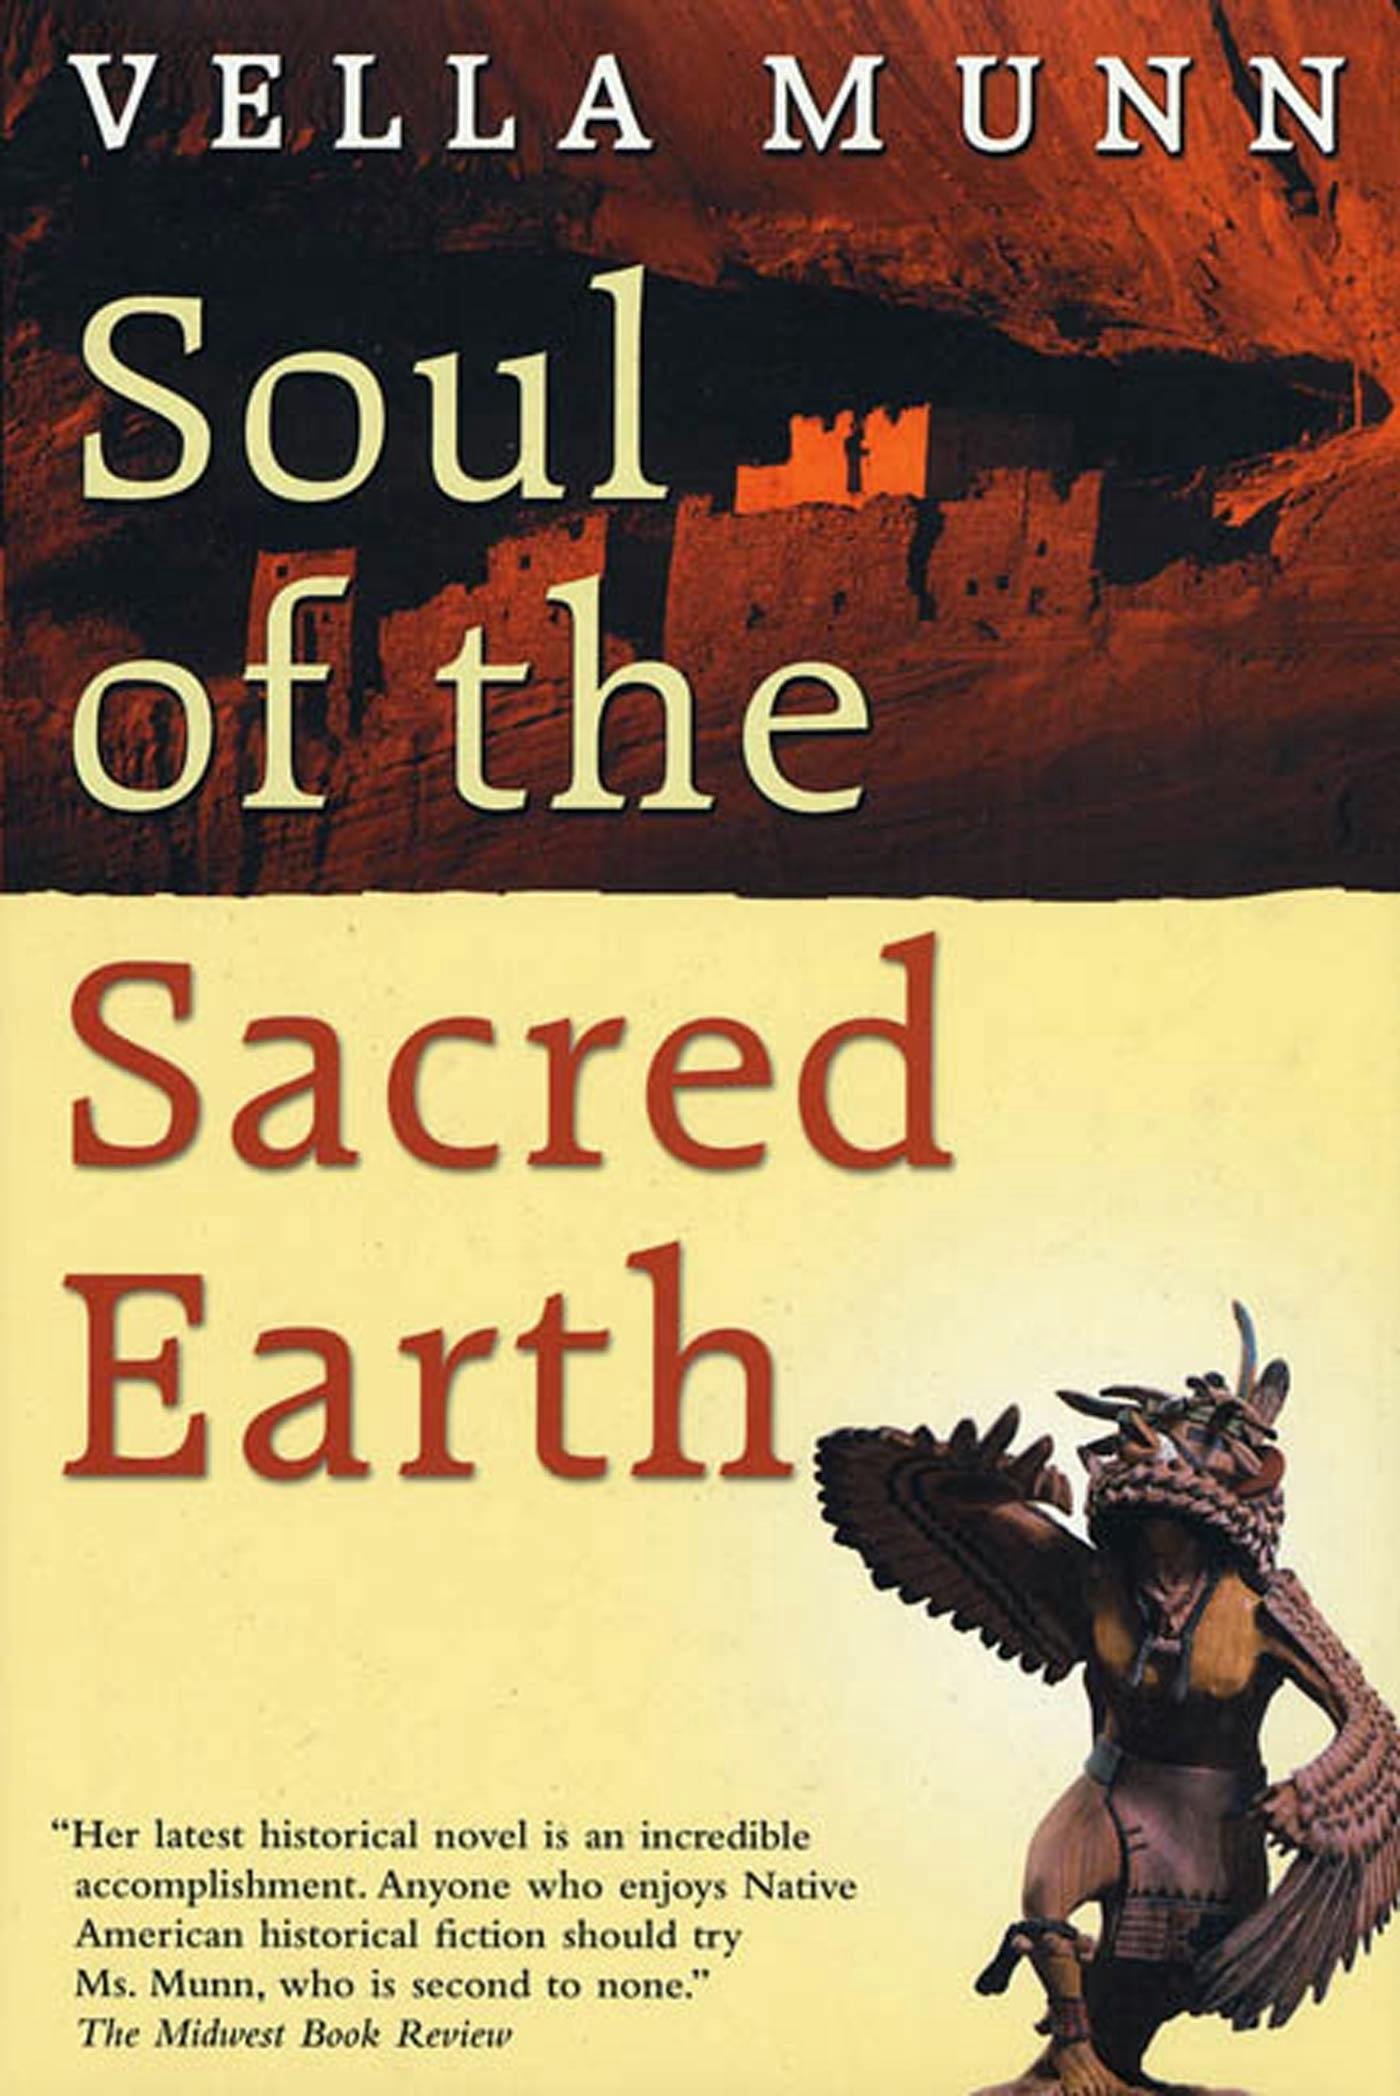 Cover for the book titled as: Soul of the Sacred Earth